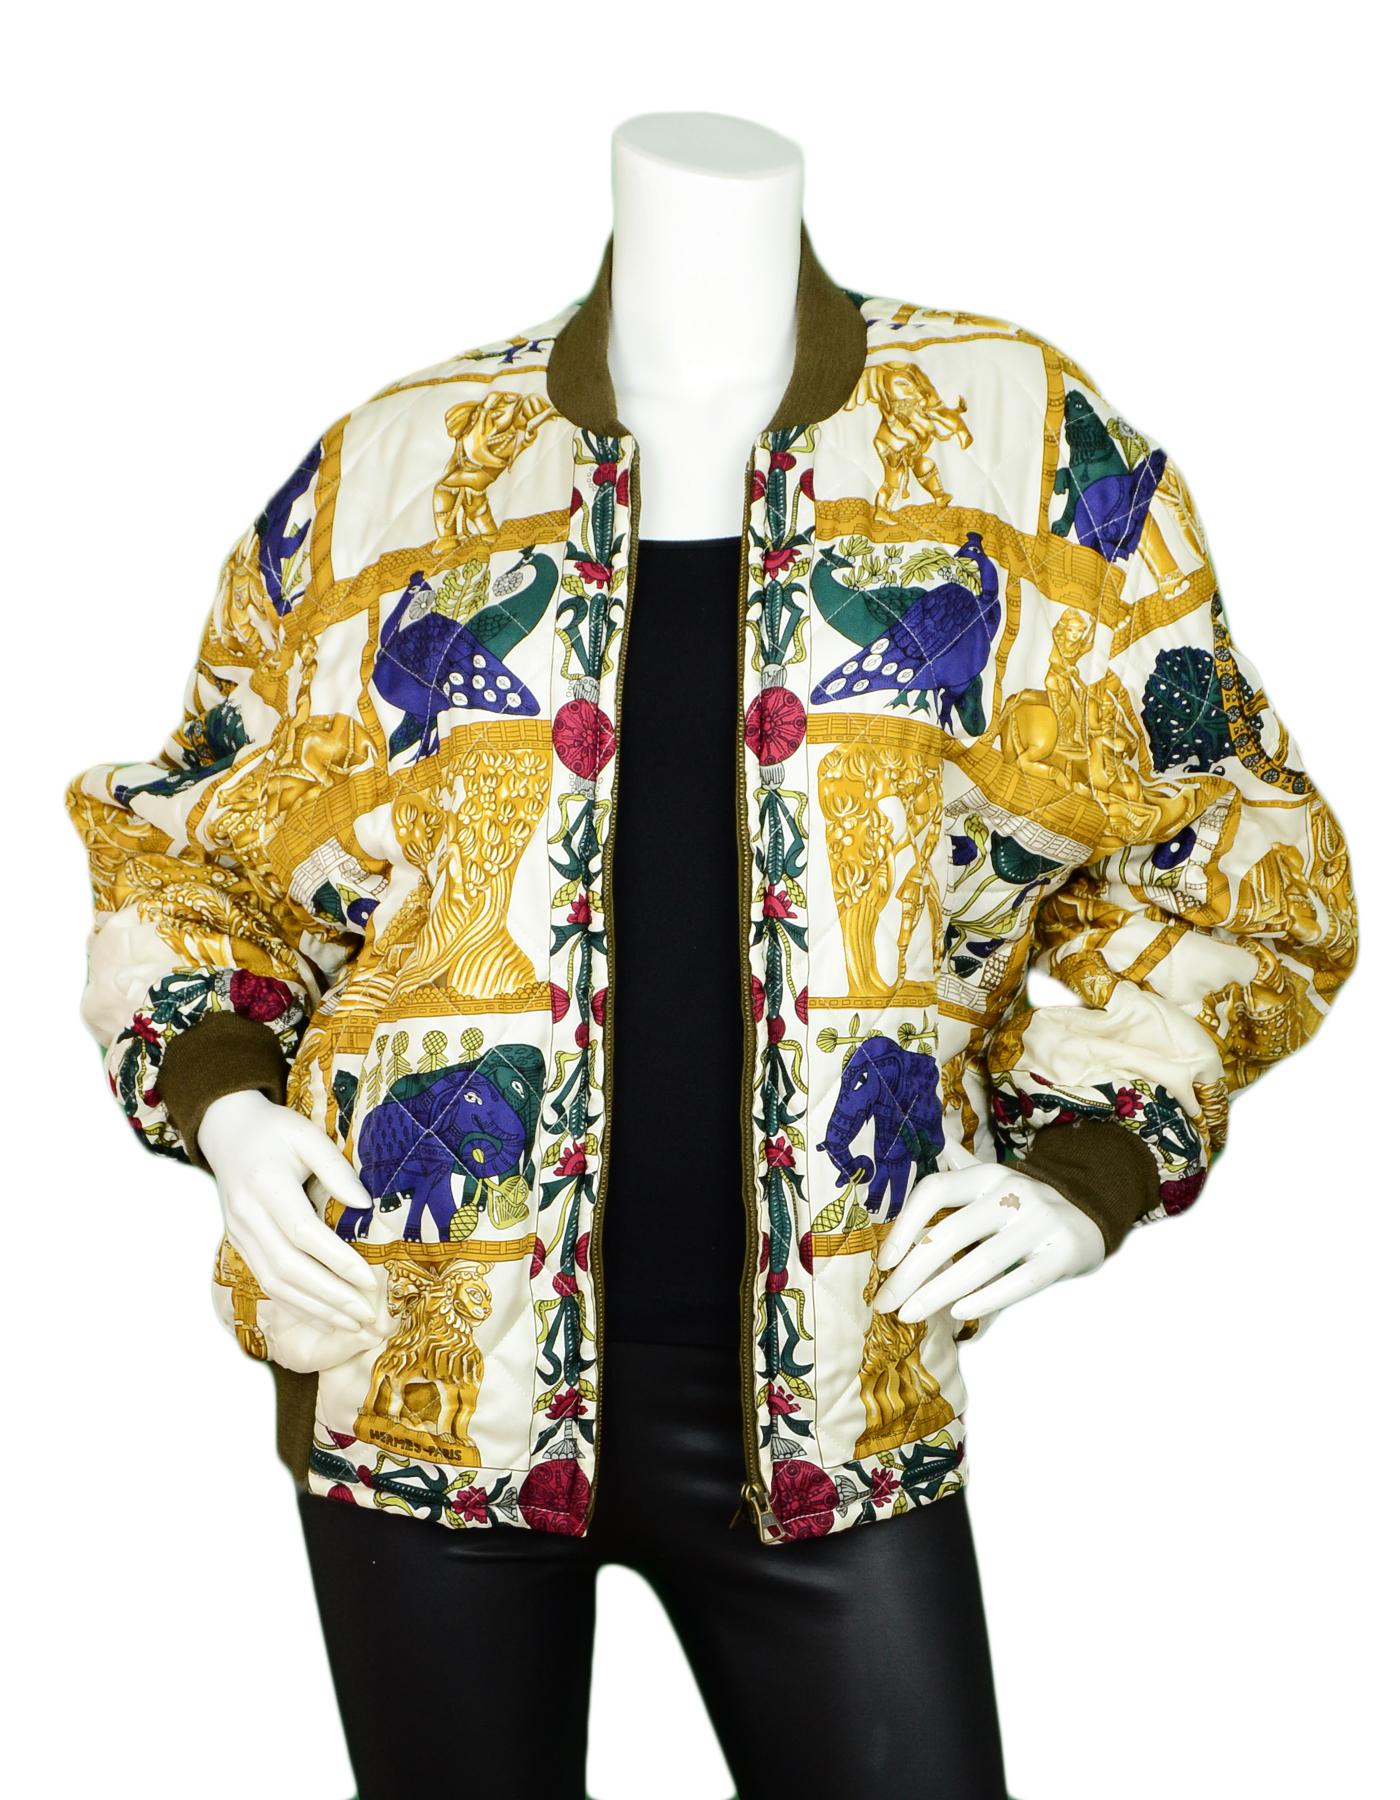 Hermes Multi-Color Silk Printed Green Reversible Bomber Jacket sz FR46/US14

Made In: France
Color: Multicolor, White, Green
Materials: 100% Silk
Lining: 85% Polyester,15% Nylon
Opening/Closure: Front zipper
Overall Condition: Excellent pre-owned